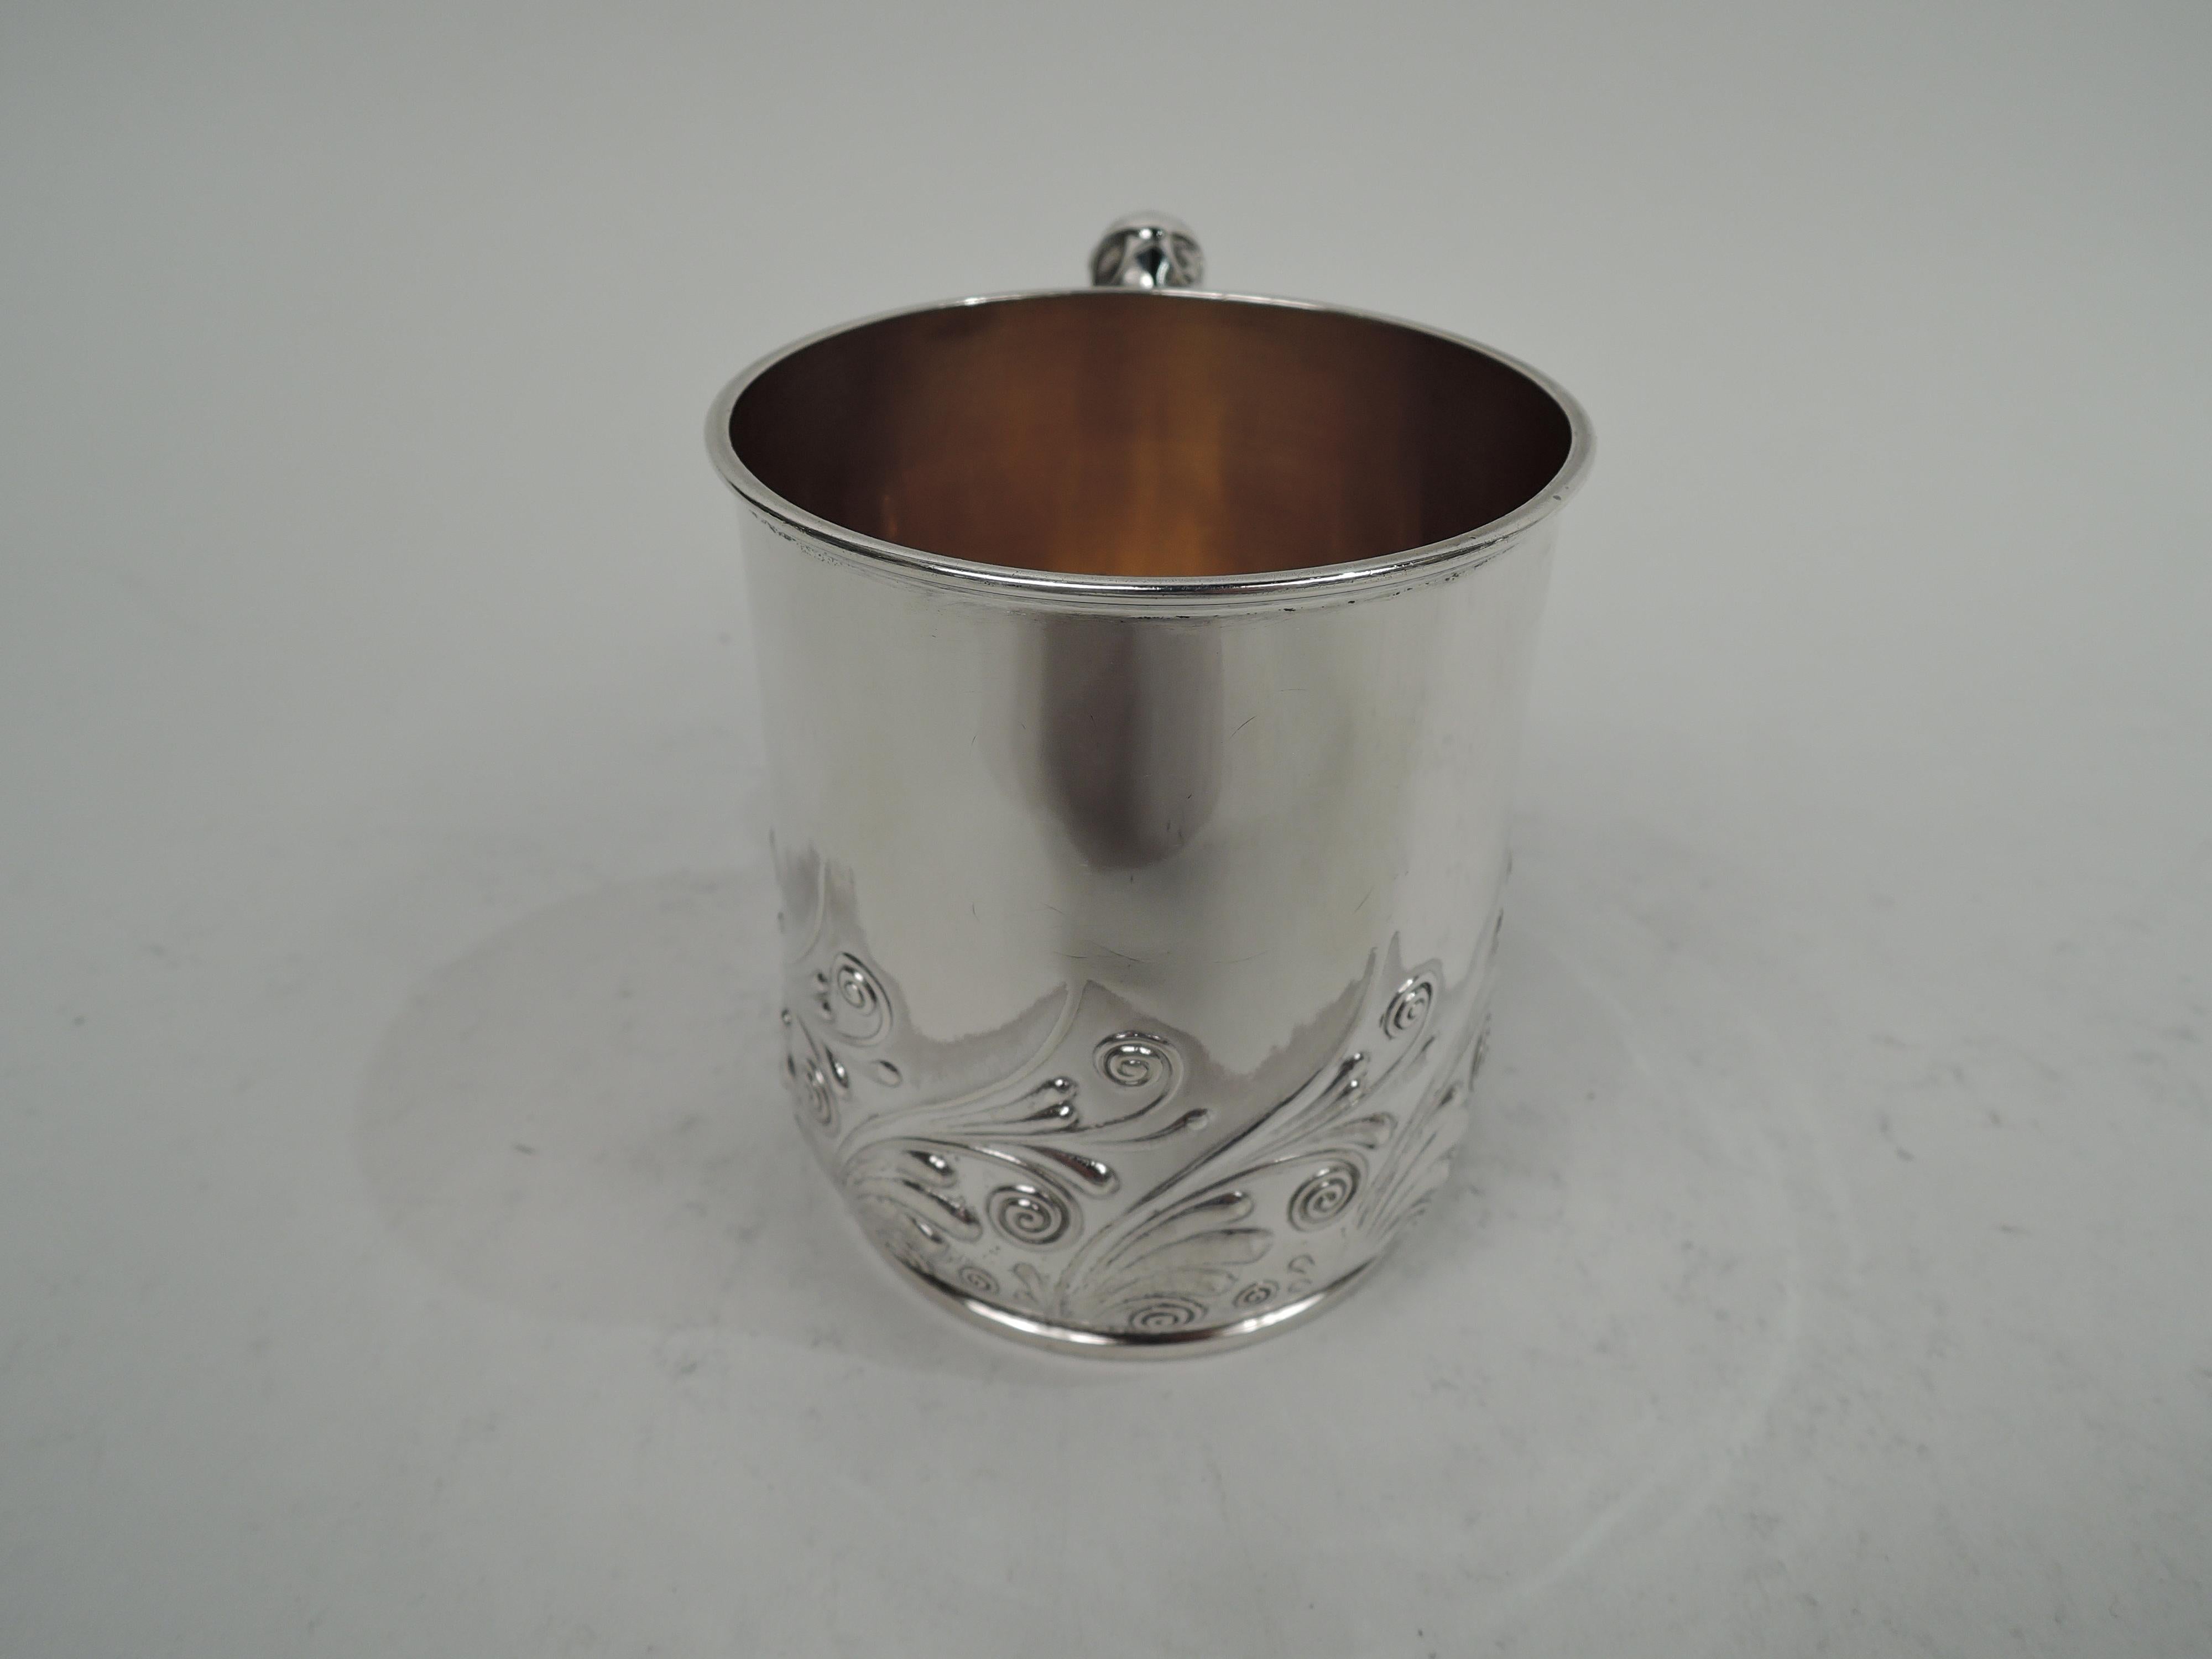 Art Nouveau sterling silver baby cup. Made by Gorham in Providence in 1893. Gently upward tapering sides and inset foot ring. C-scroll handle comprising imbricated volute scrolls. At bowl bottom chased stylized scrolling tendril border. Gilt